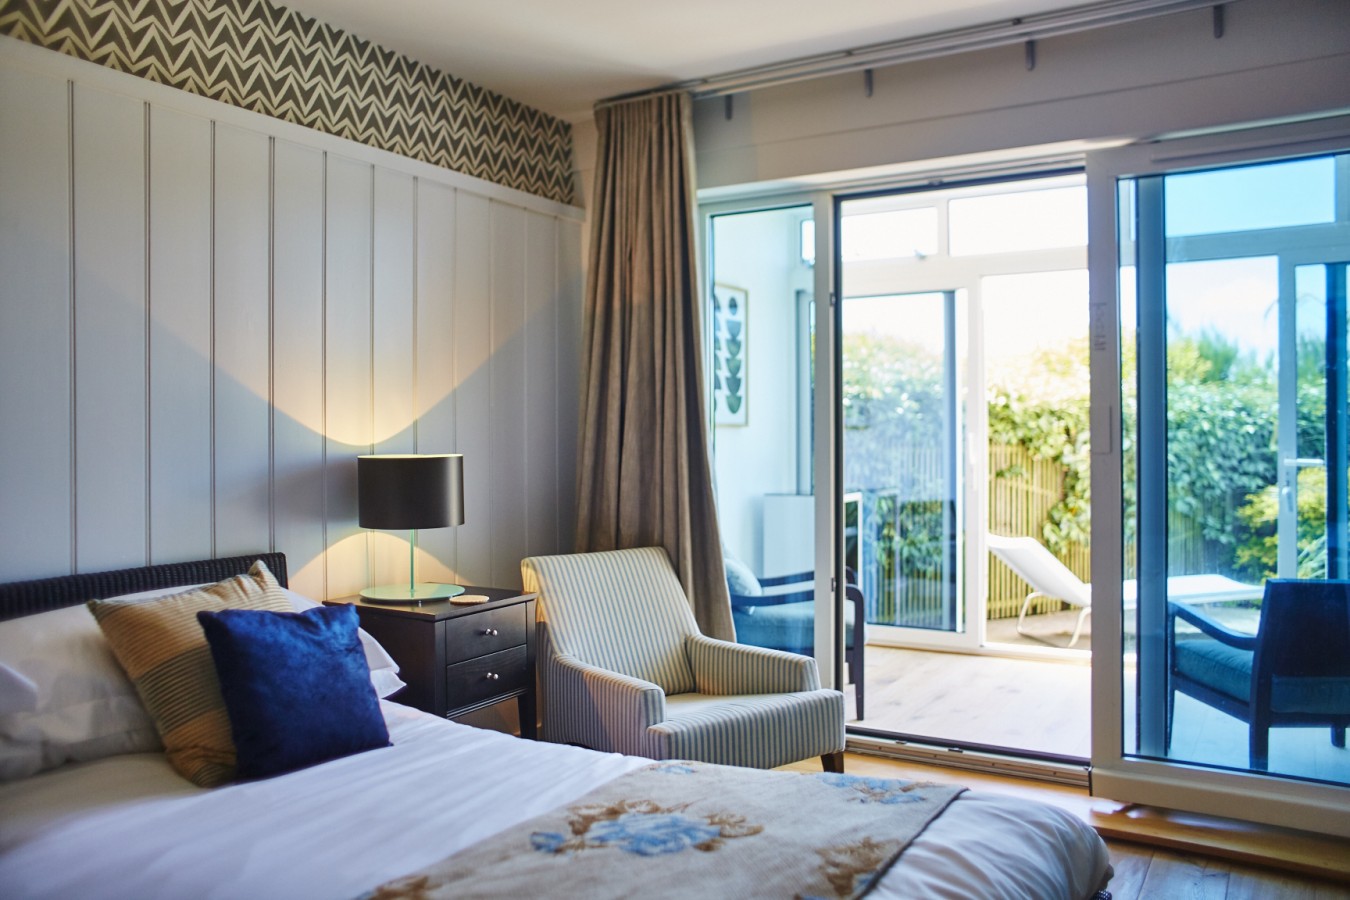 We Check In to St Moritz Hotel and Spa - A Cowshed Retreat on the Cornish Coast